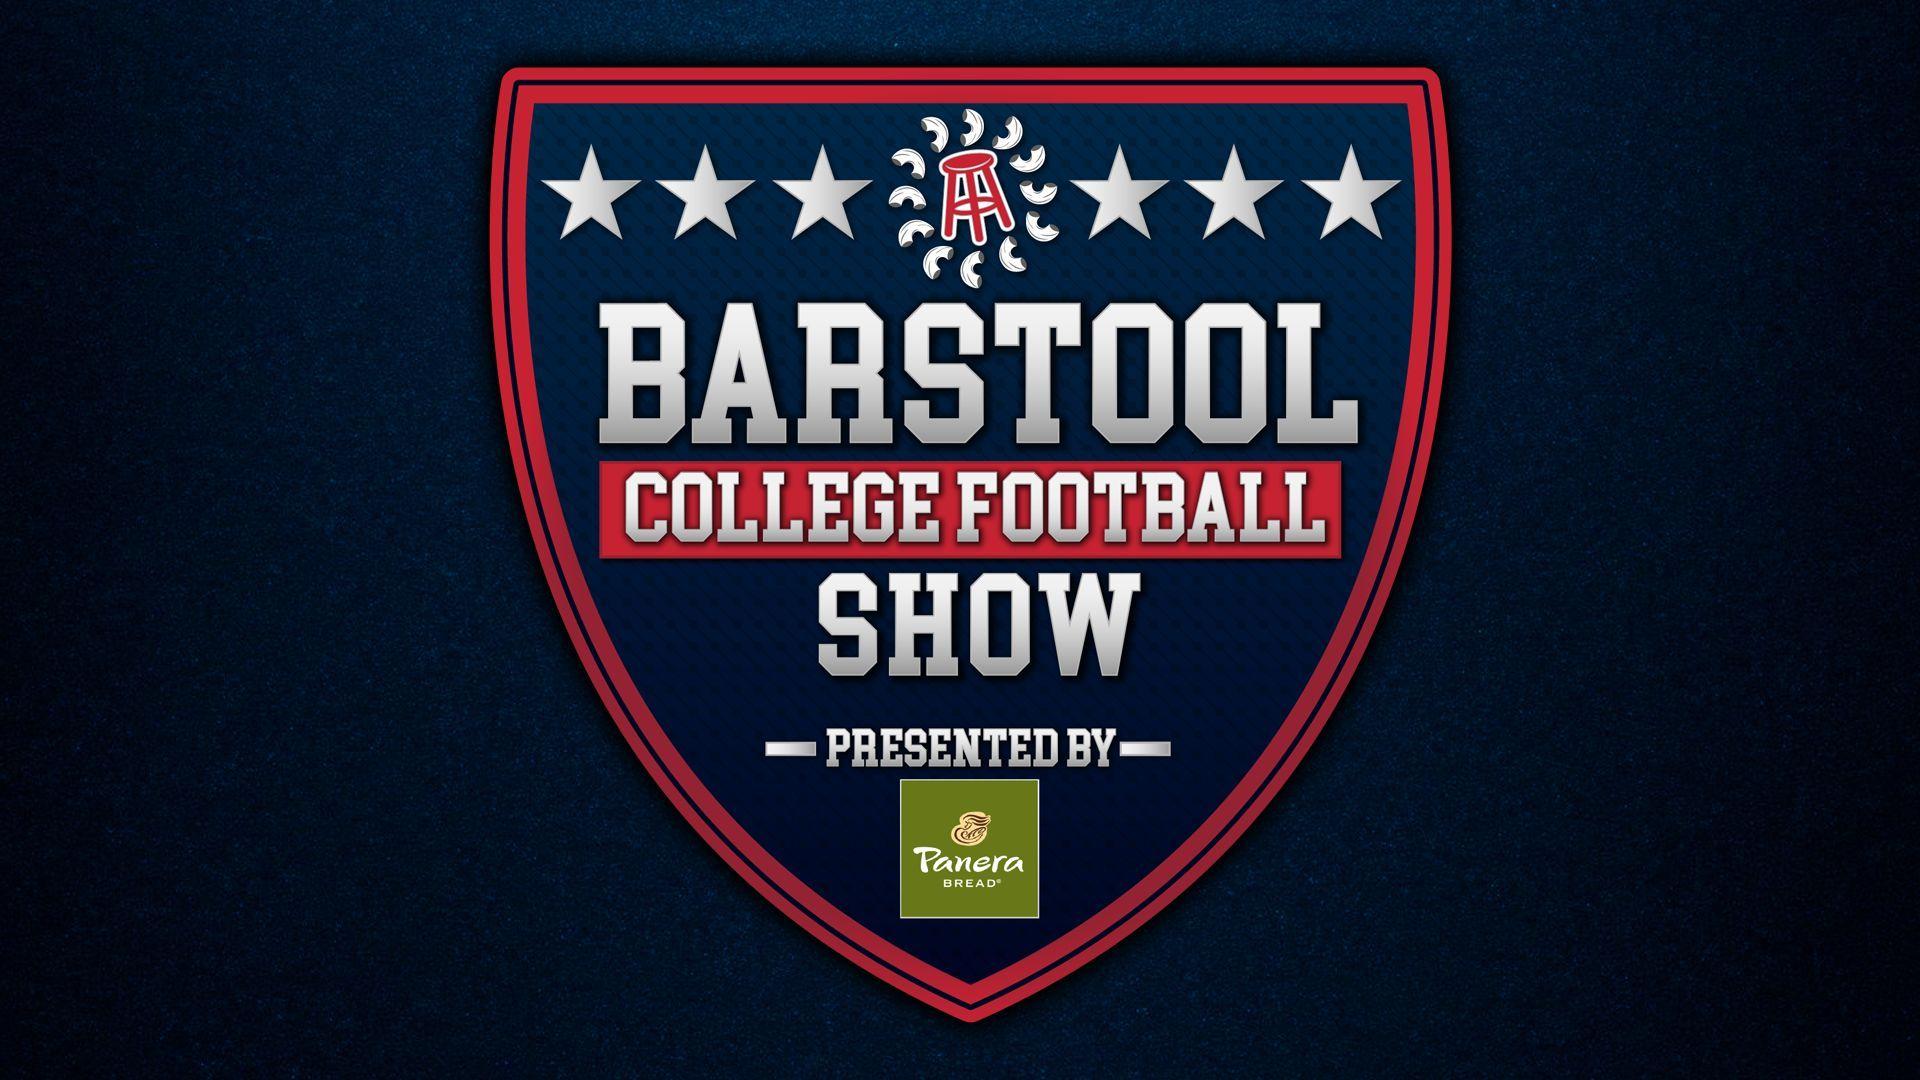 Bcfs Logo - The Barstool College Football Show Debuts Saturday at 10 AM. Will Be ...